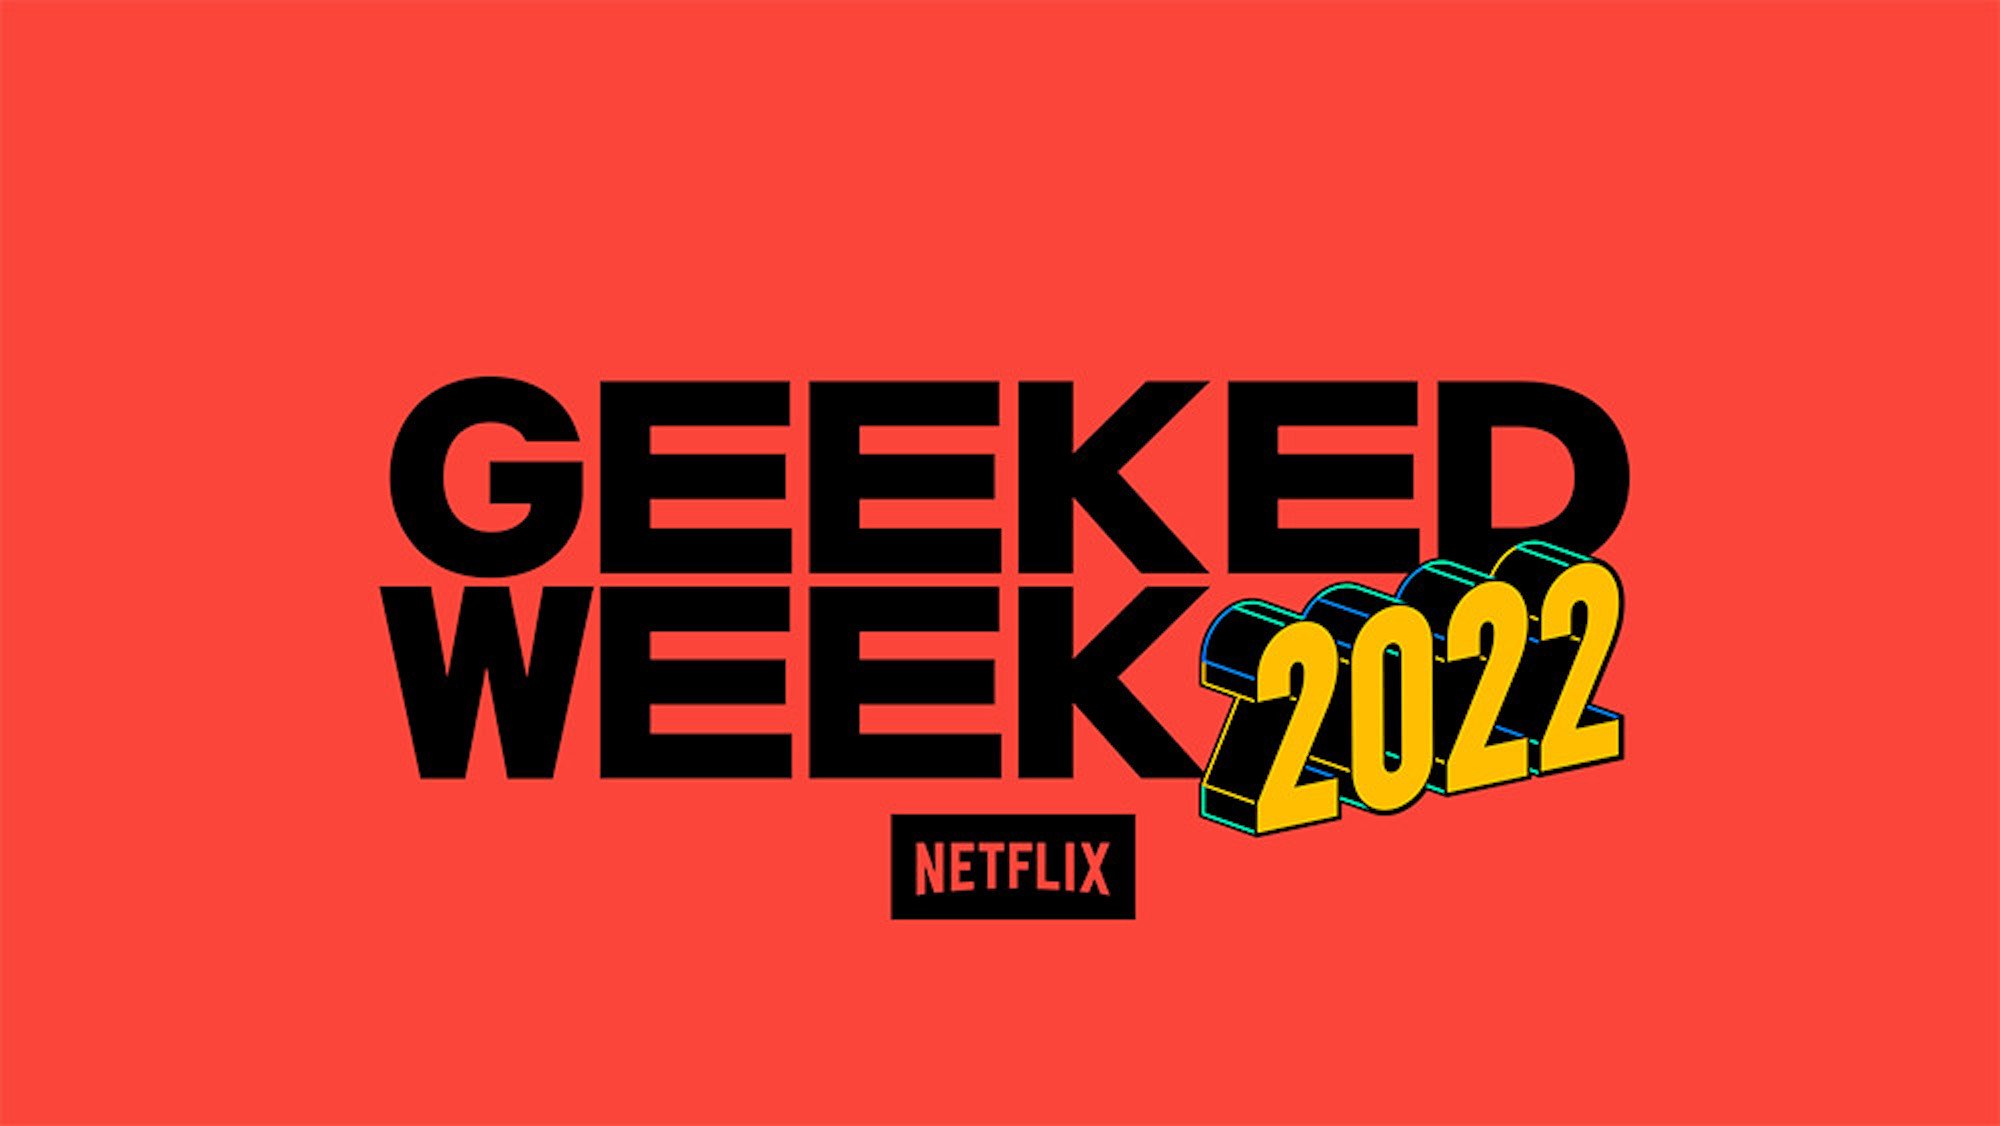 Netflix Geeked Week 2022 stars on June 6 with new trailers, guest panels, and more.